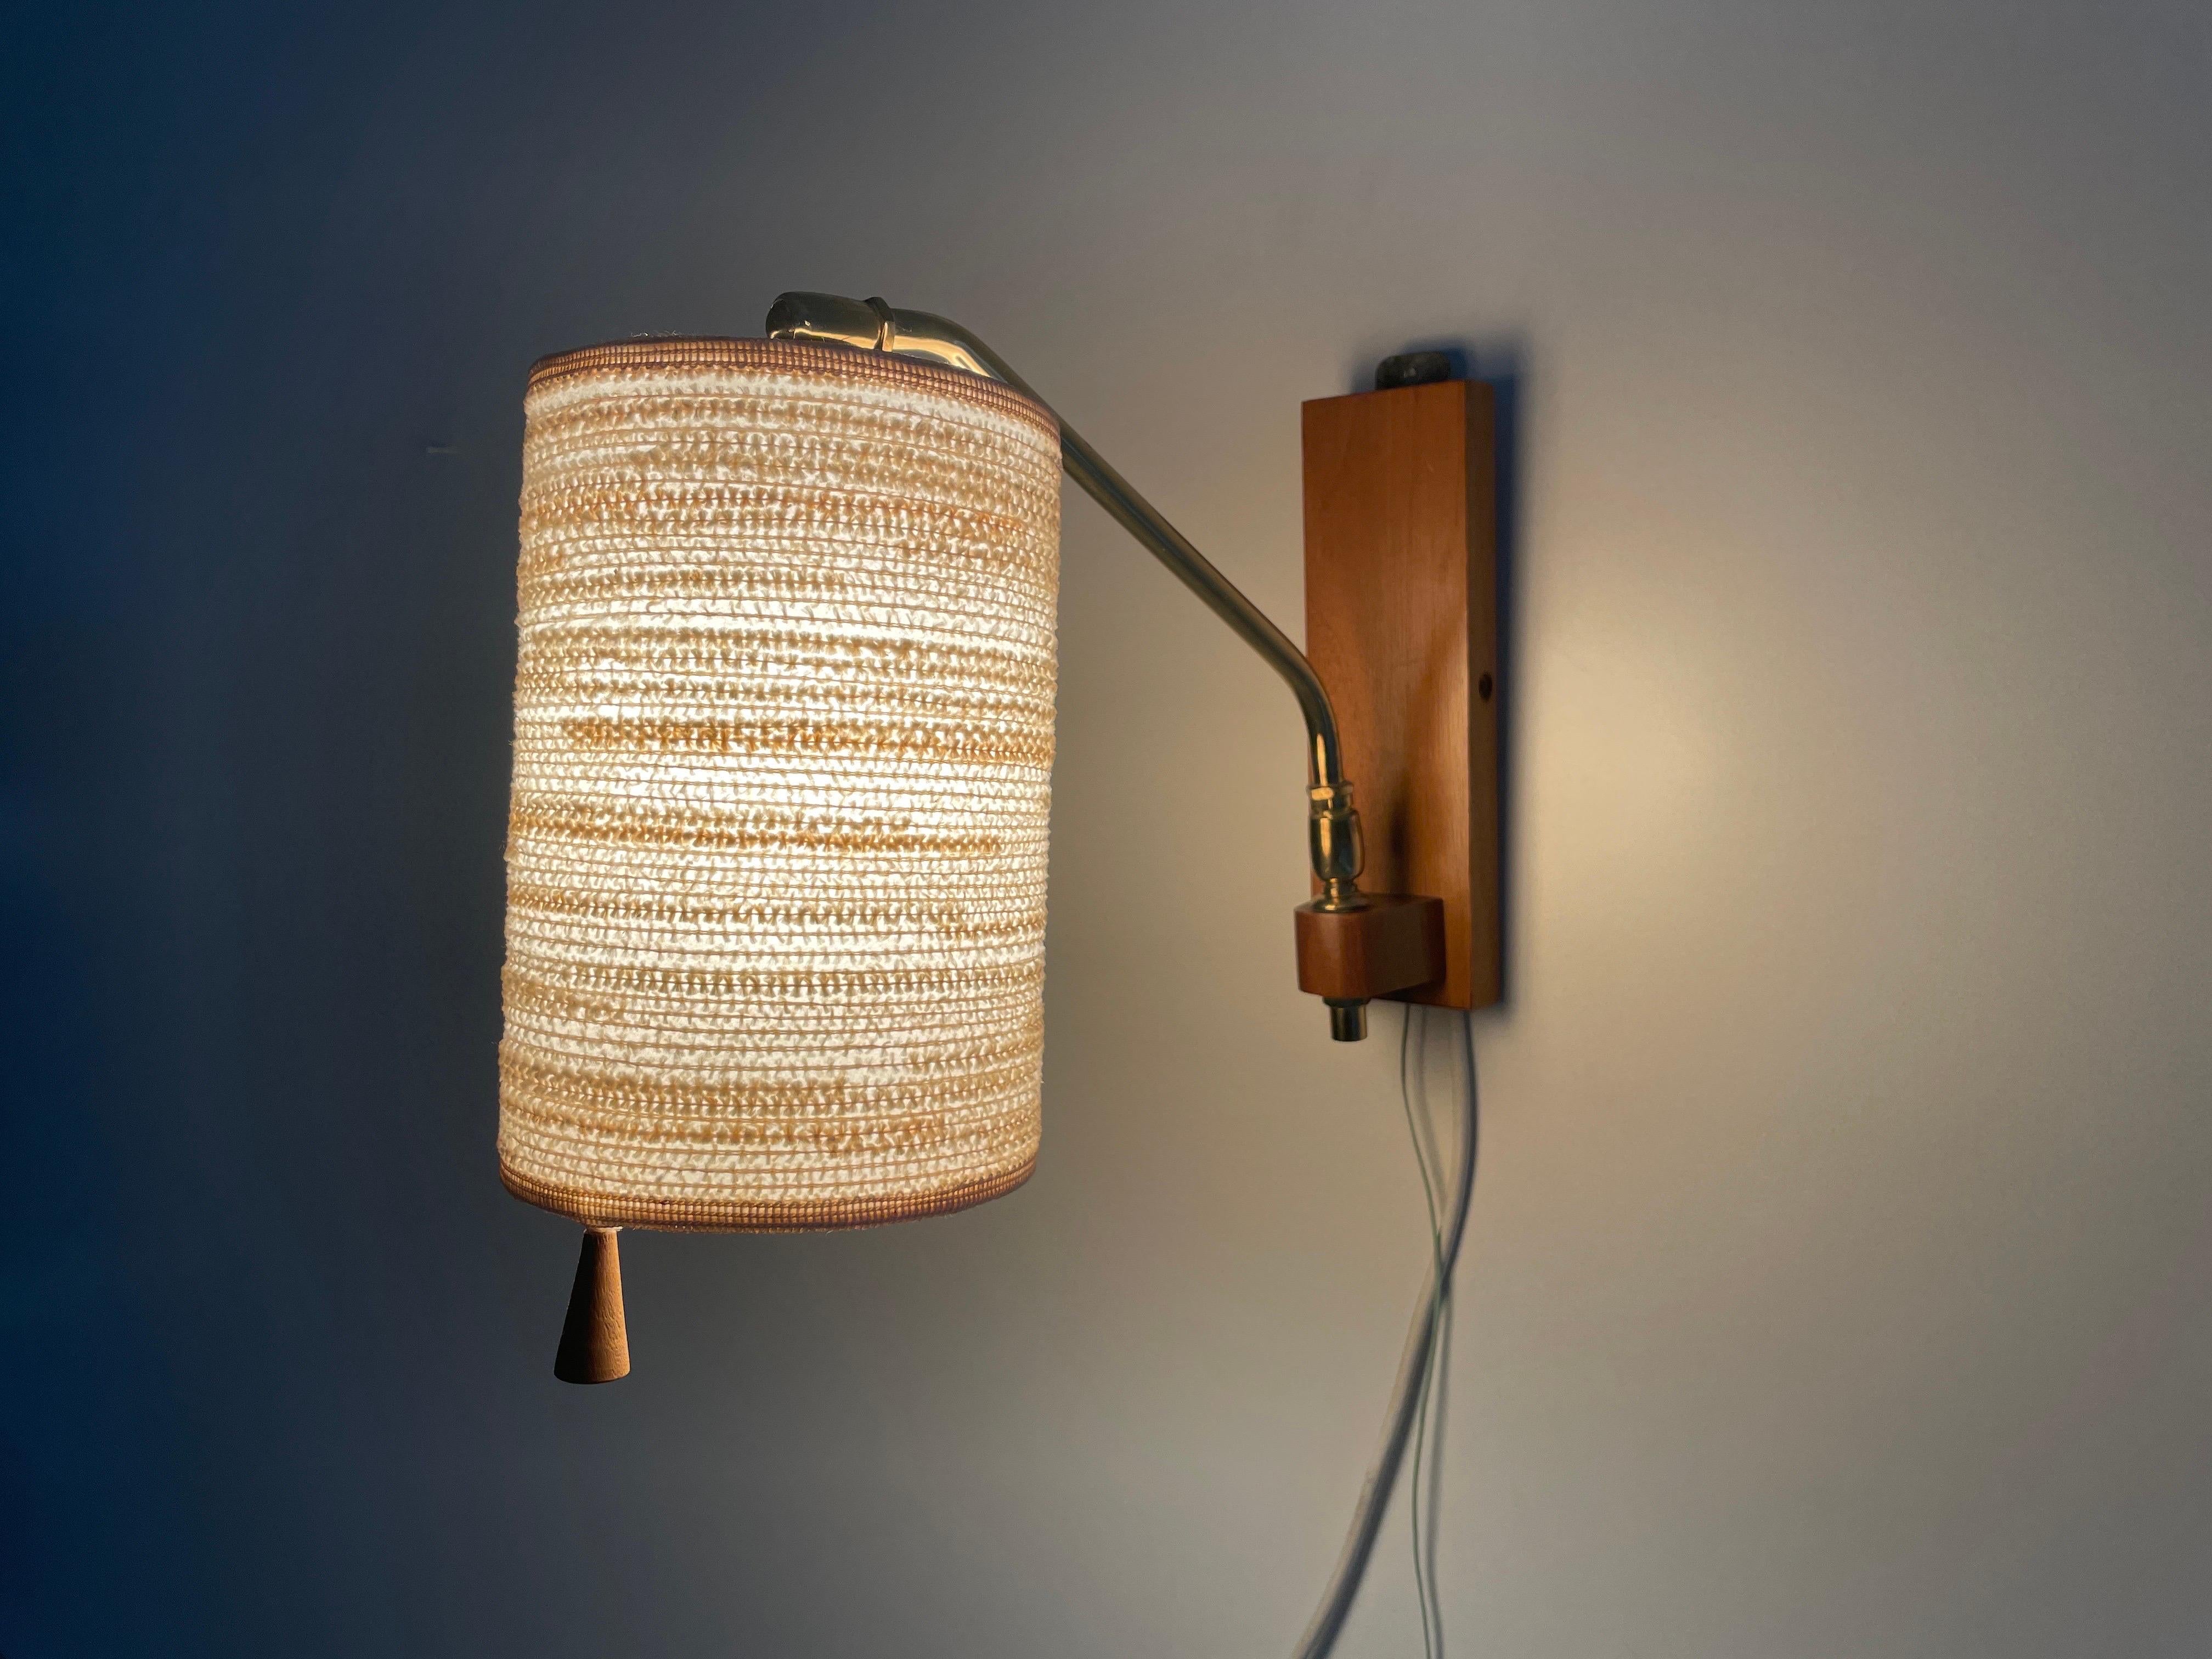 Fabric Shade and Wood Wall Lamp with Brass Neck, 1960s, Germany For Sale 10